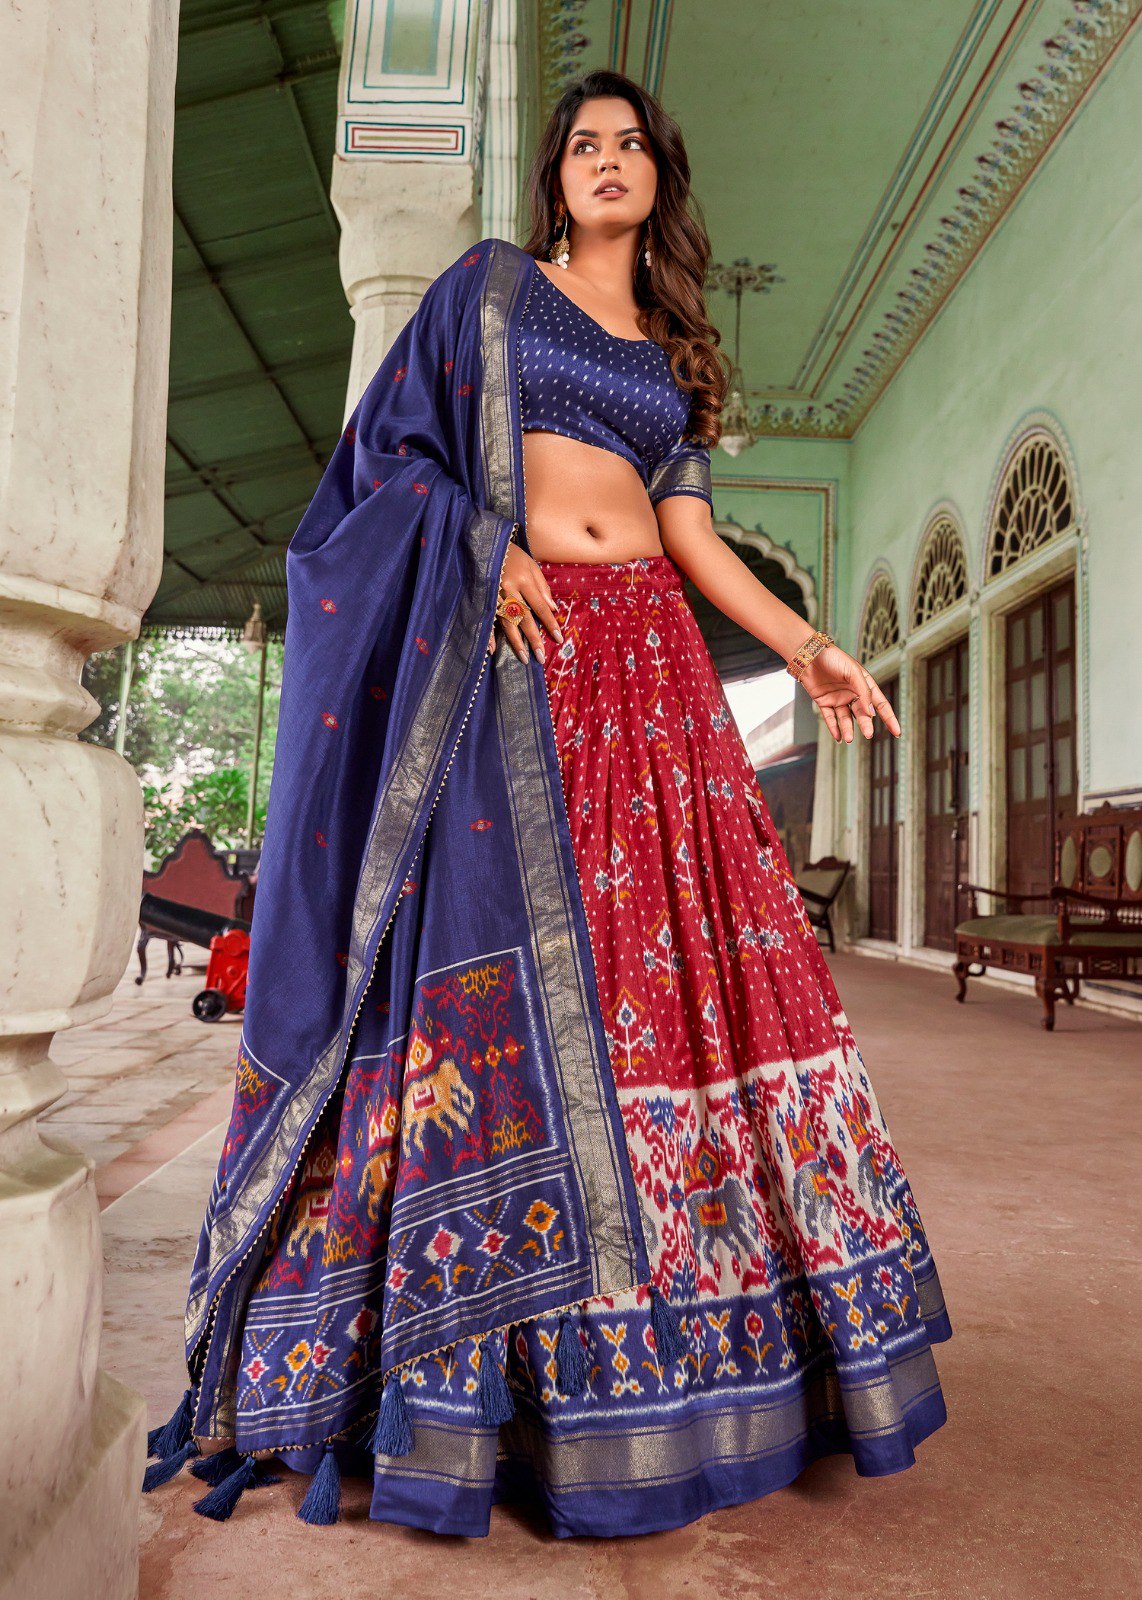 Maroon and blue Embroidery Pure Silk Sabyasachi Party Wear Lehenga with  Blouse at Rs 2299 | Dindoli | Surat | ID: 21379328262